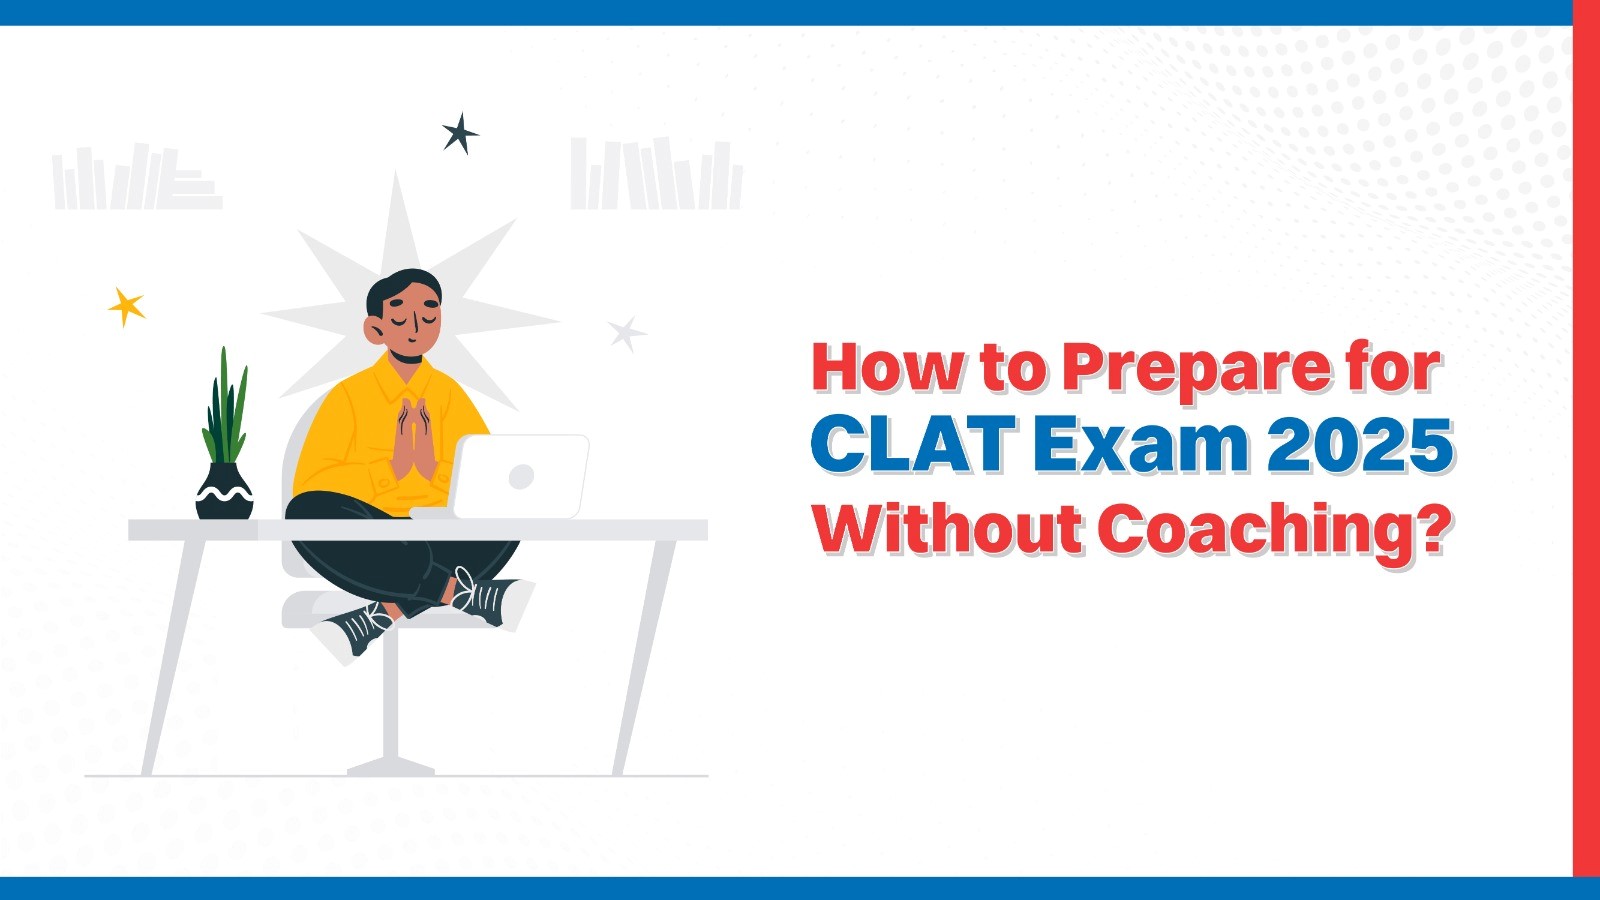 How to Prepare for CLAT Exam 2025 Without Coaching.jpg